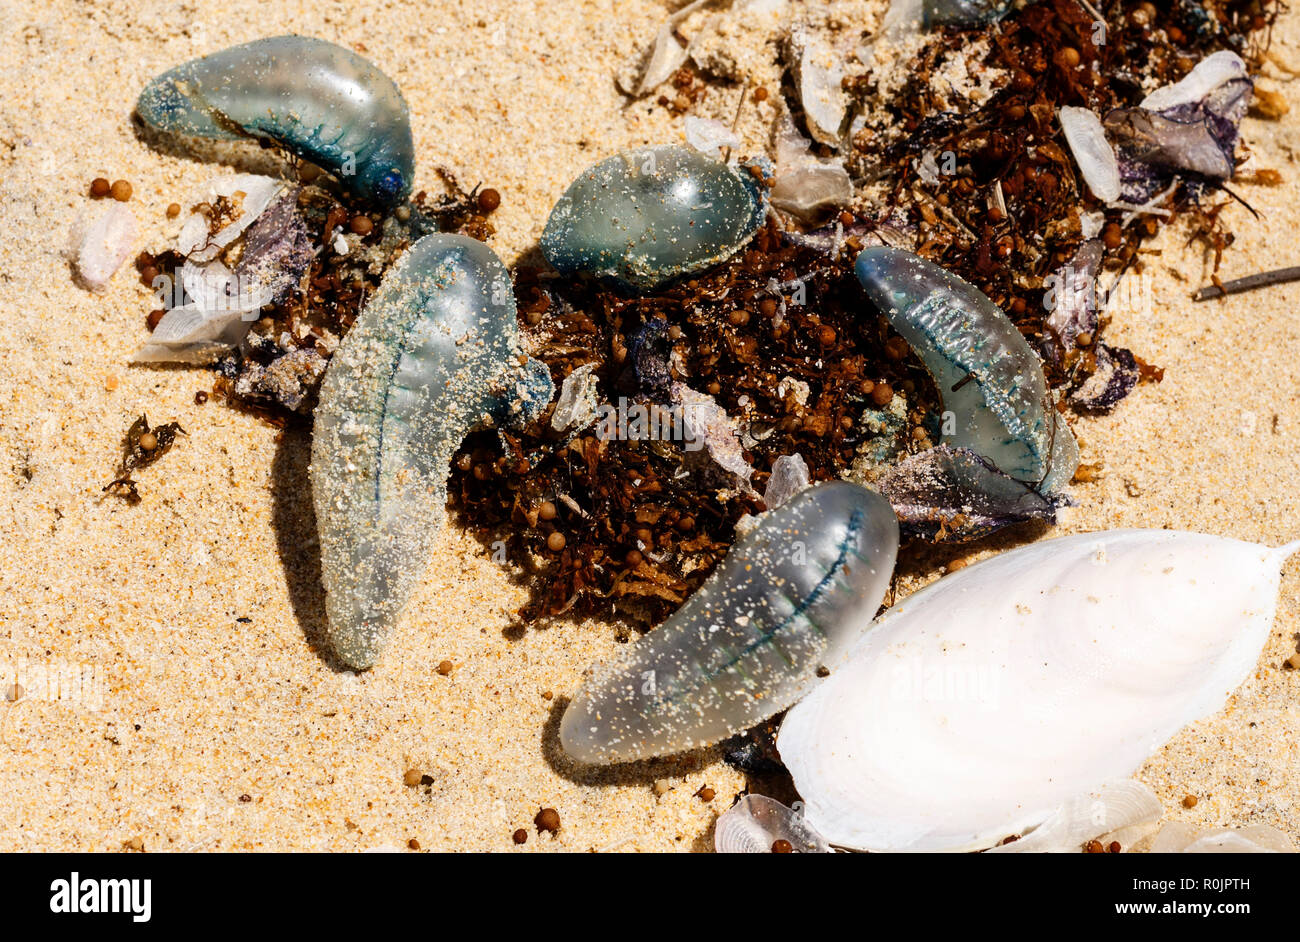 Bluebottles jellyfish washed on an exposed ocean beach during a windy day in Queensland, Australia Stock Photo